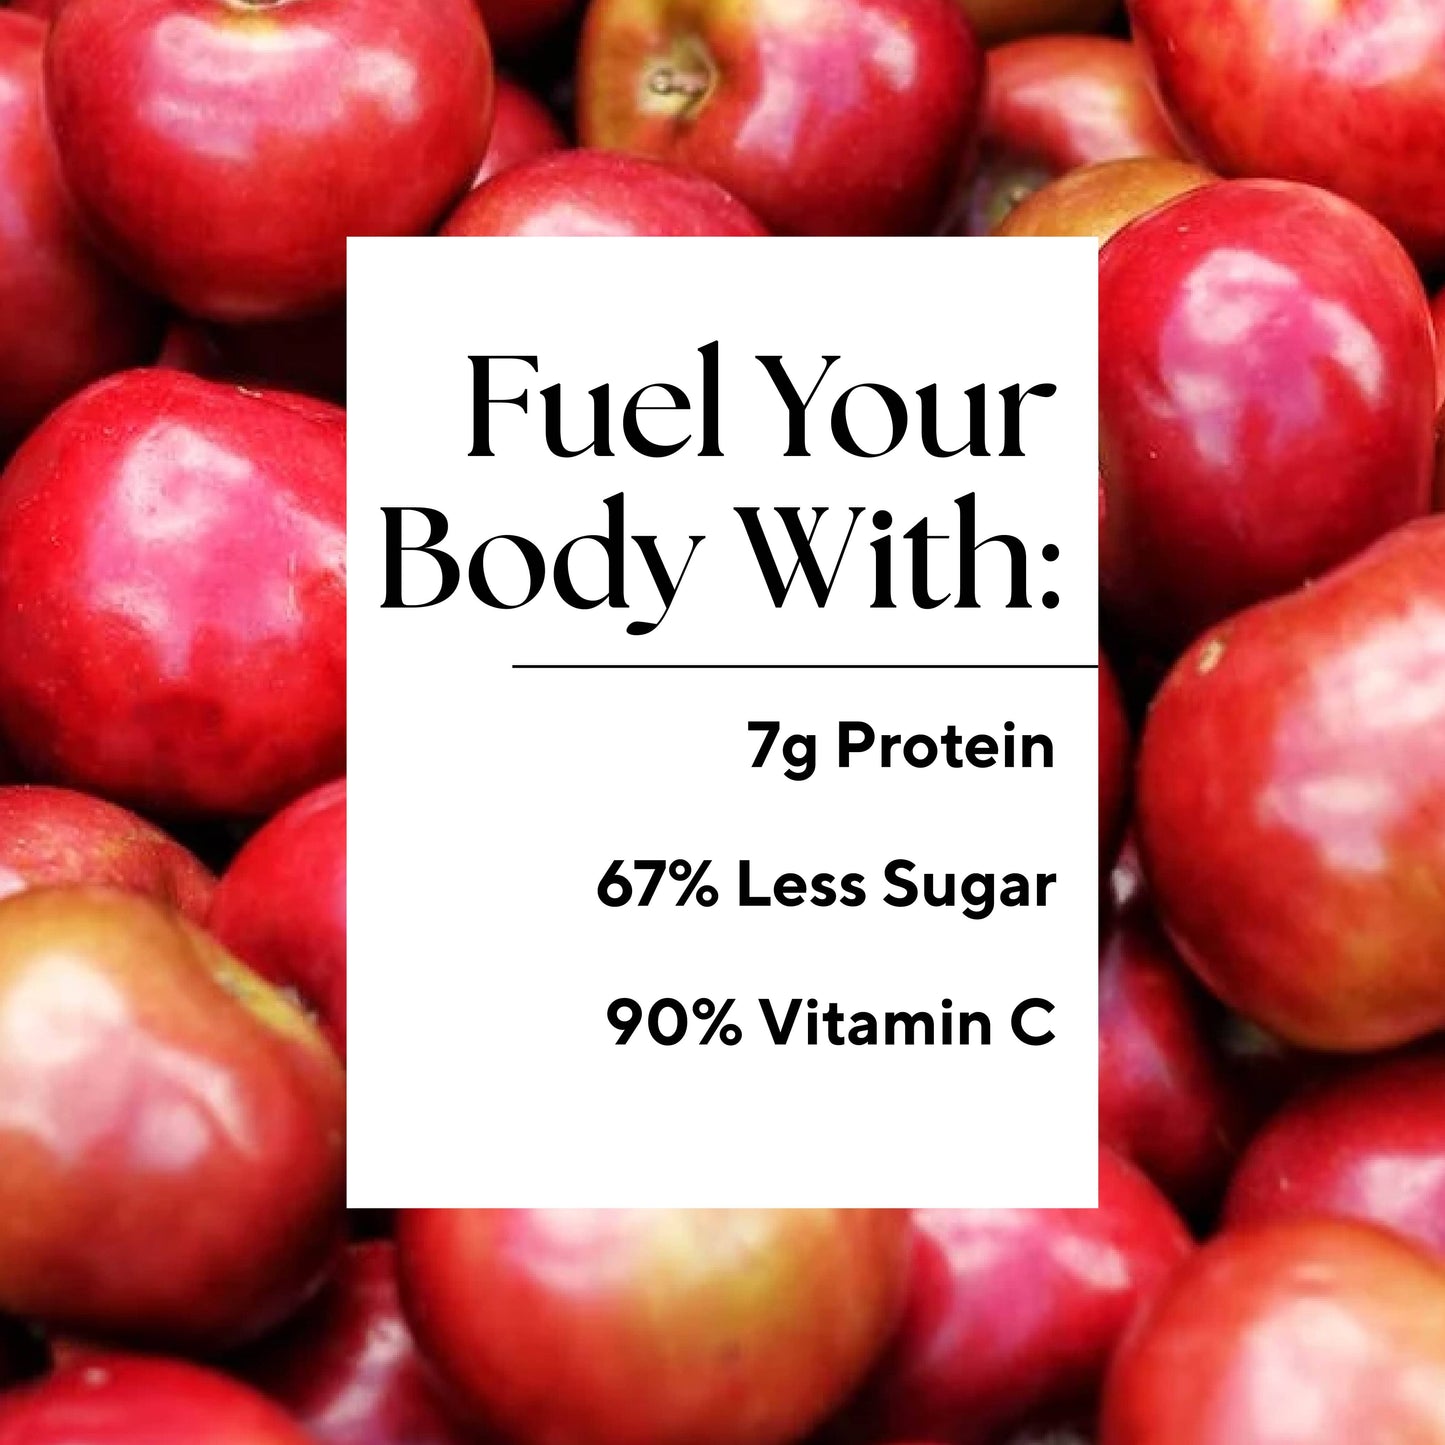 Infographic that reads: "Fuel your body with: 7 grams Protein, 67% Less Sugar, and 90% Vitamin C"